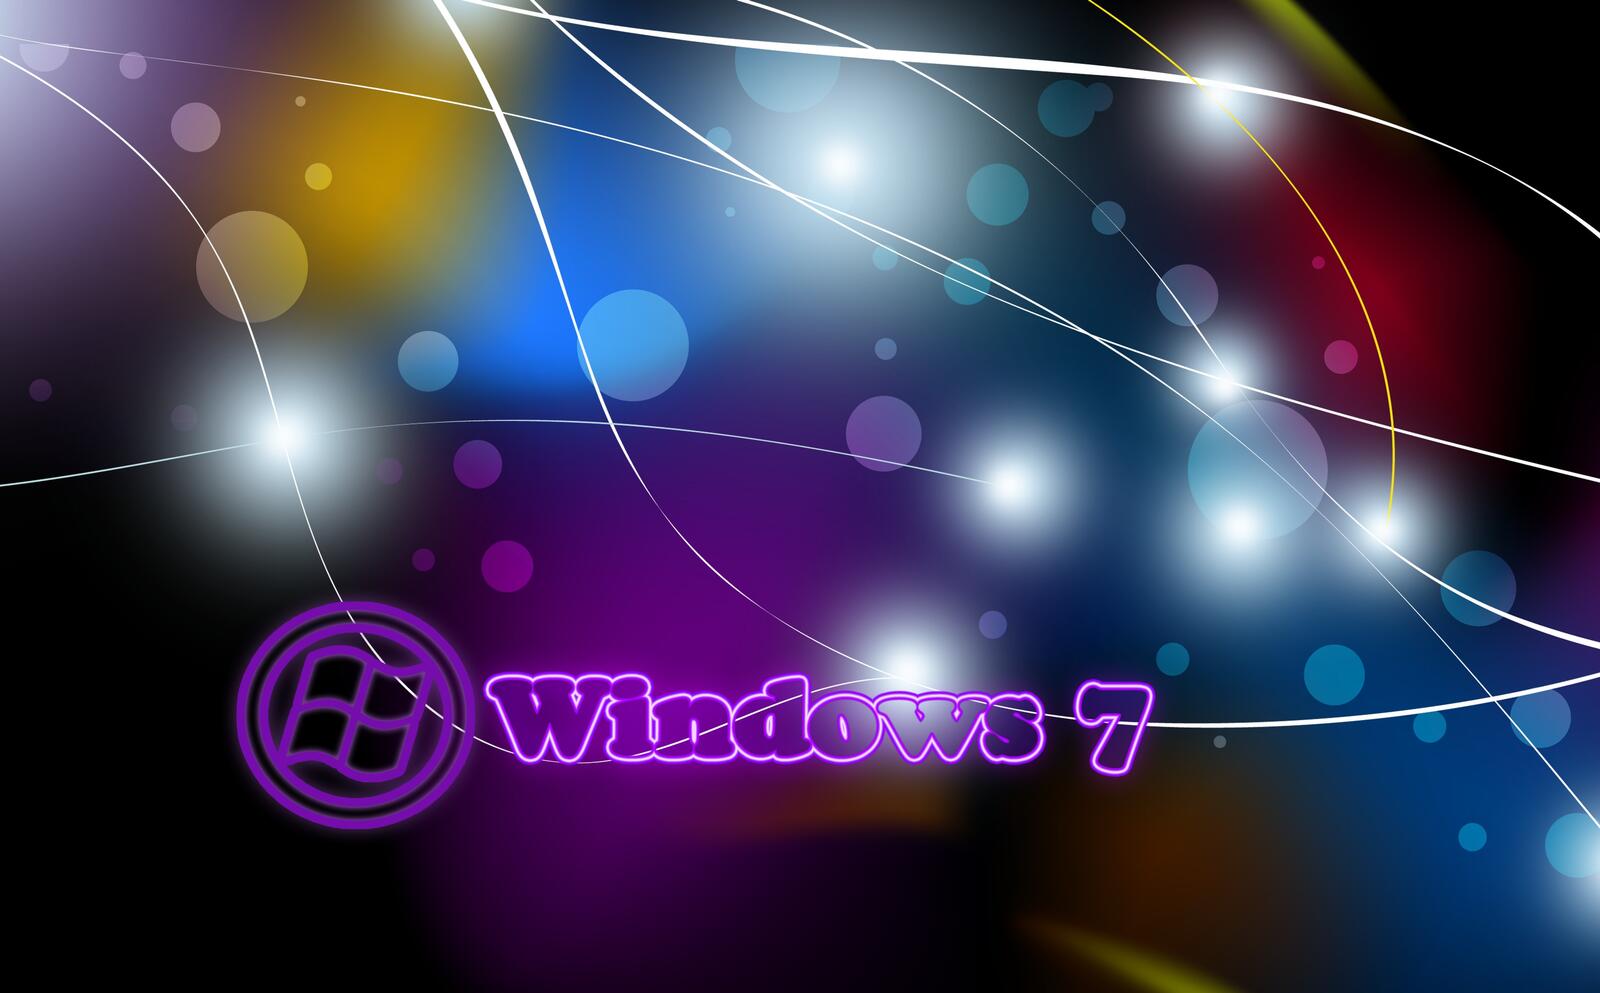 Wallpapers Wallpapers for PC windows 7 abstraction hi-tech on the desktop